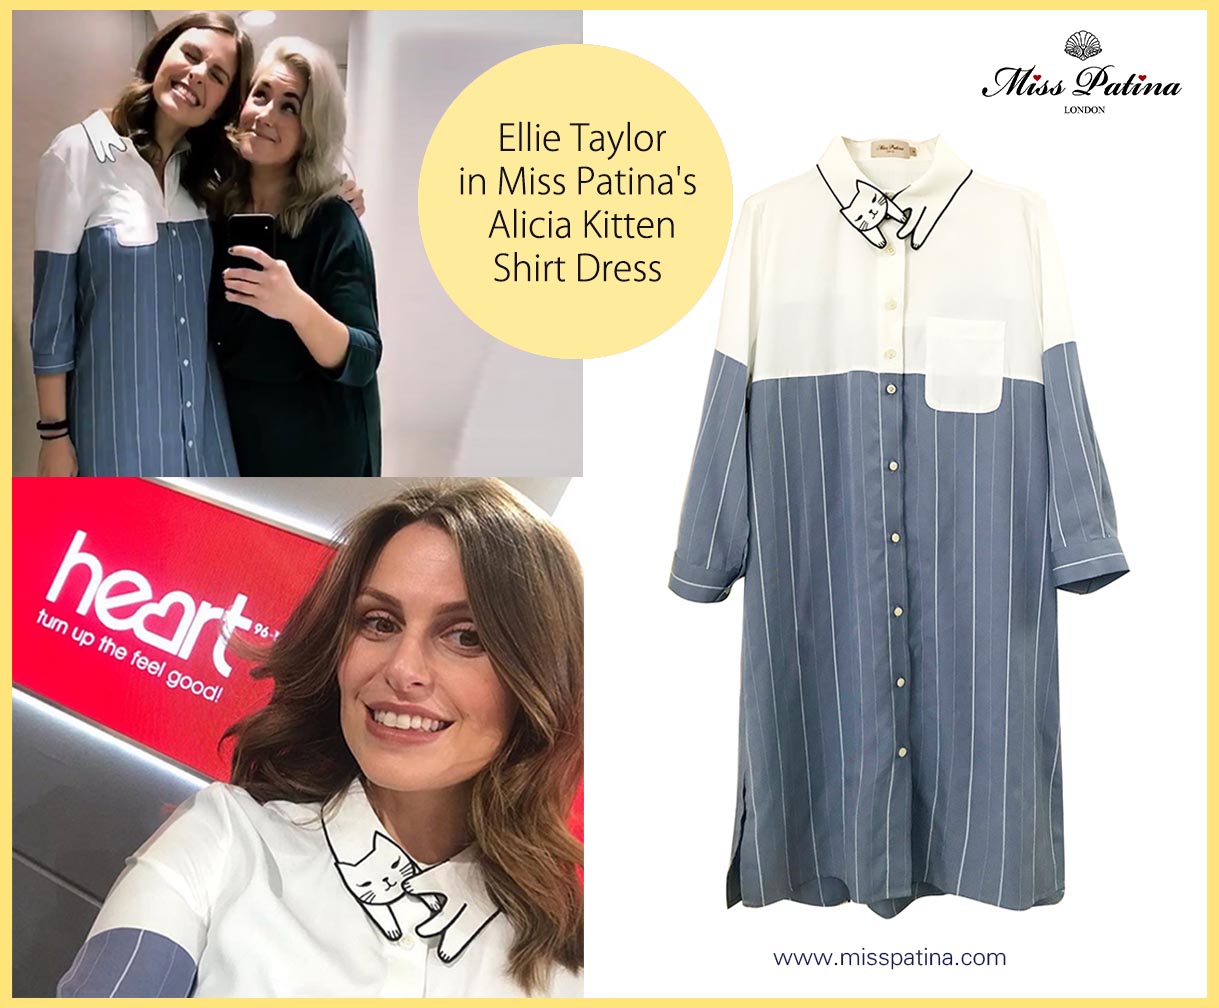 Spotted: Ellie Taylor in Miss Patina